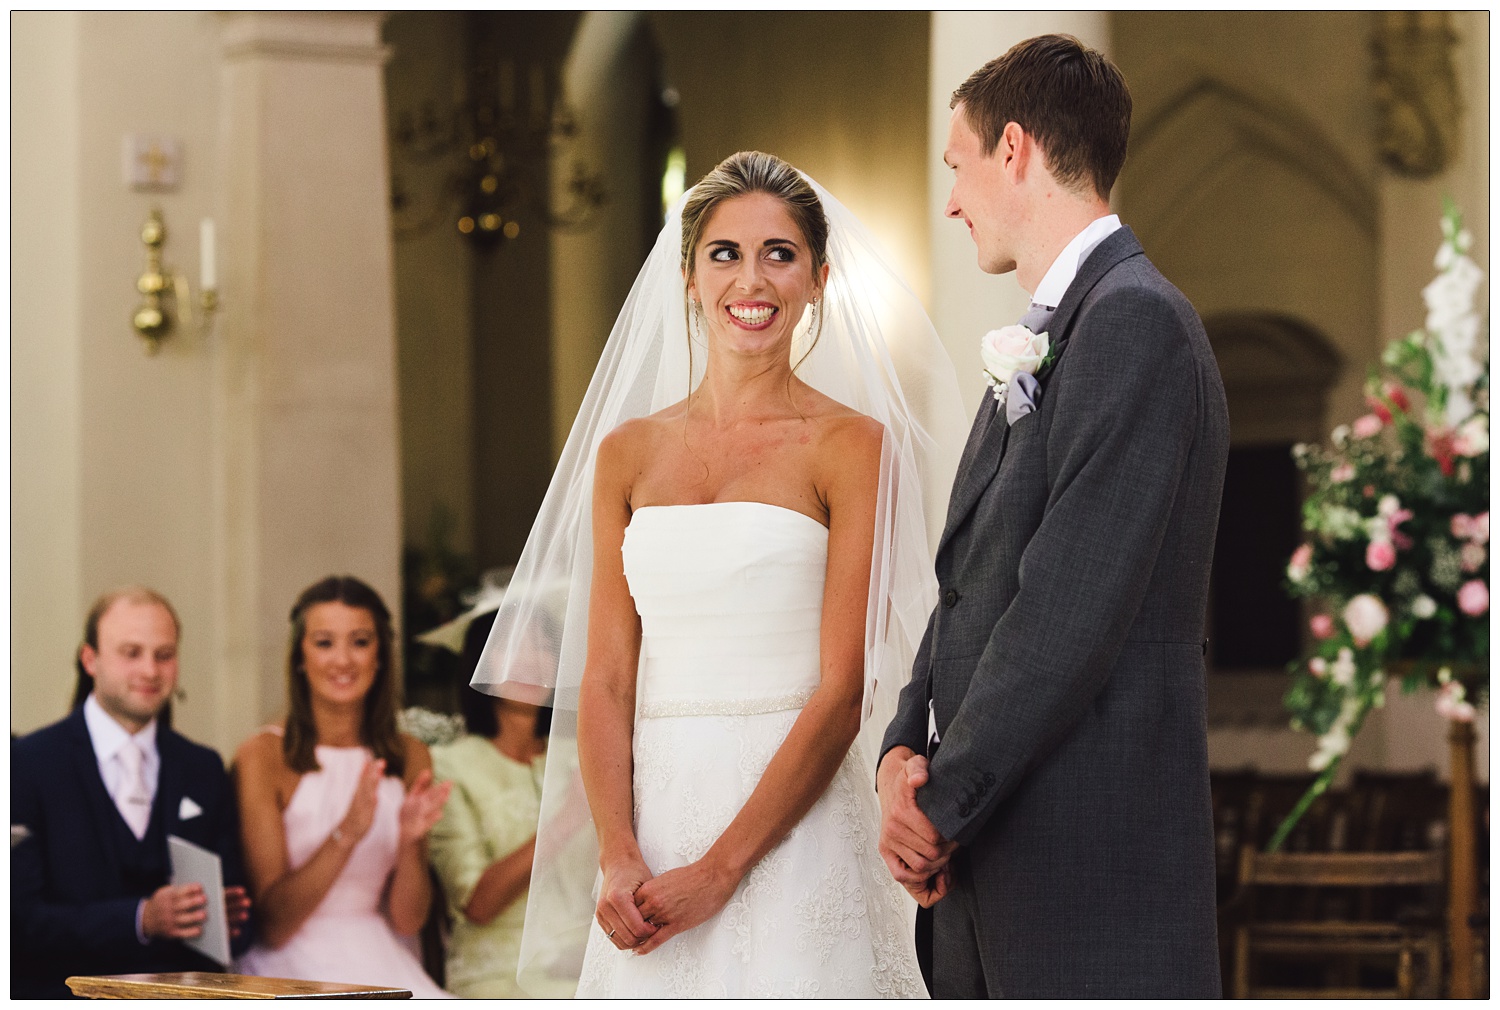 A woman in her wedding dress smiles at the man she is marrying in Brentwood Cathedral.